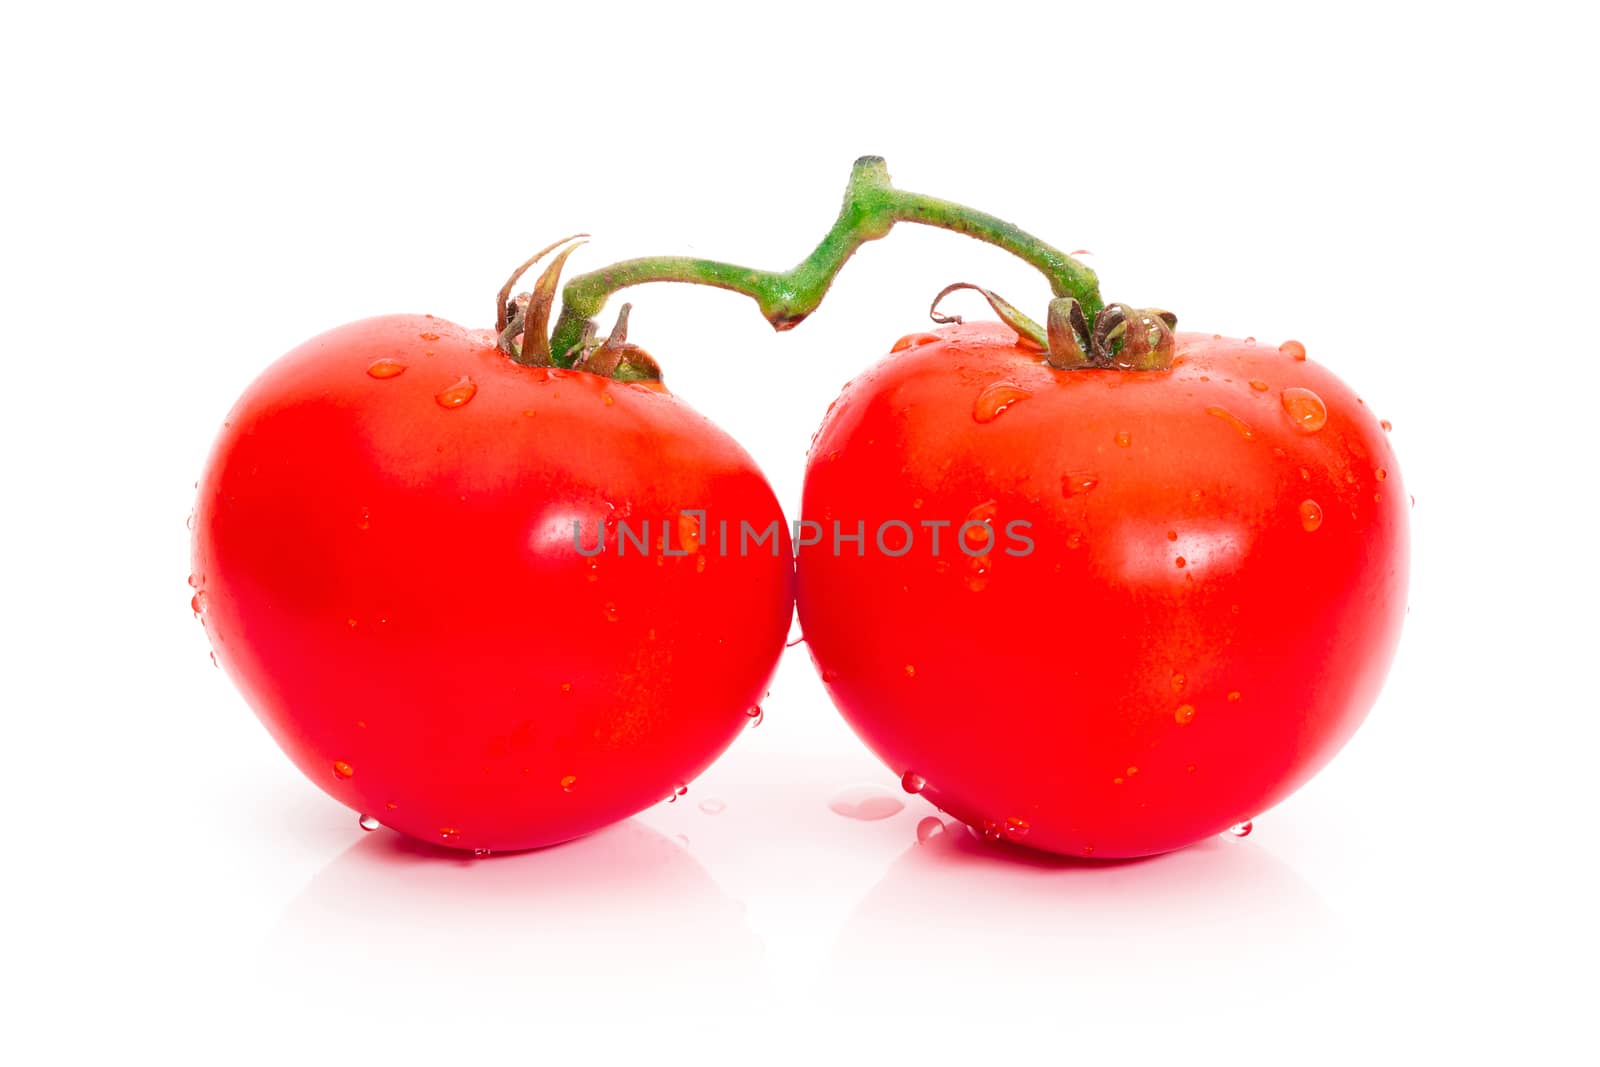 Tomato red color on a white background by sompongtom